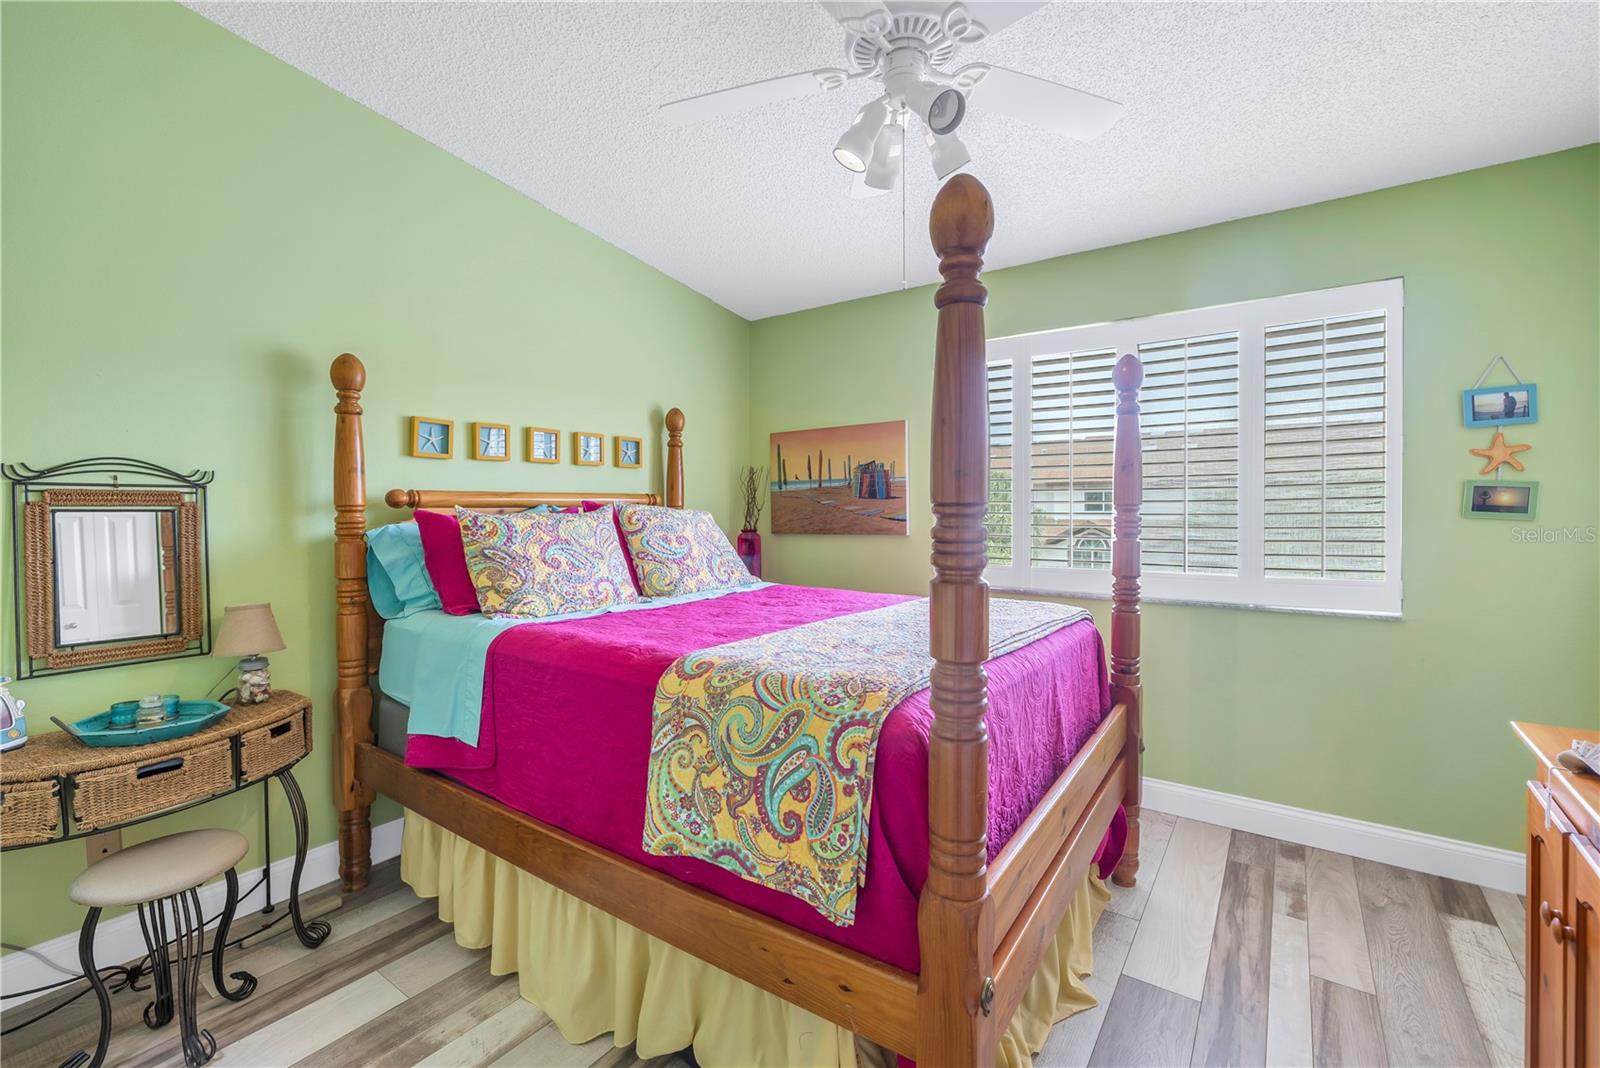 Third bedroom with plantation shutters